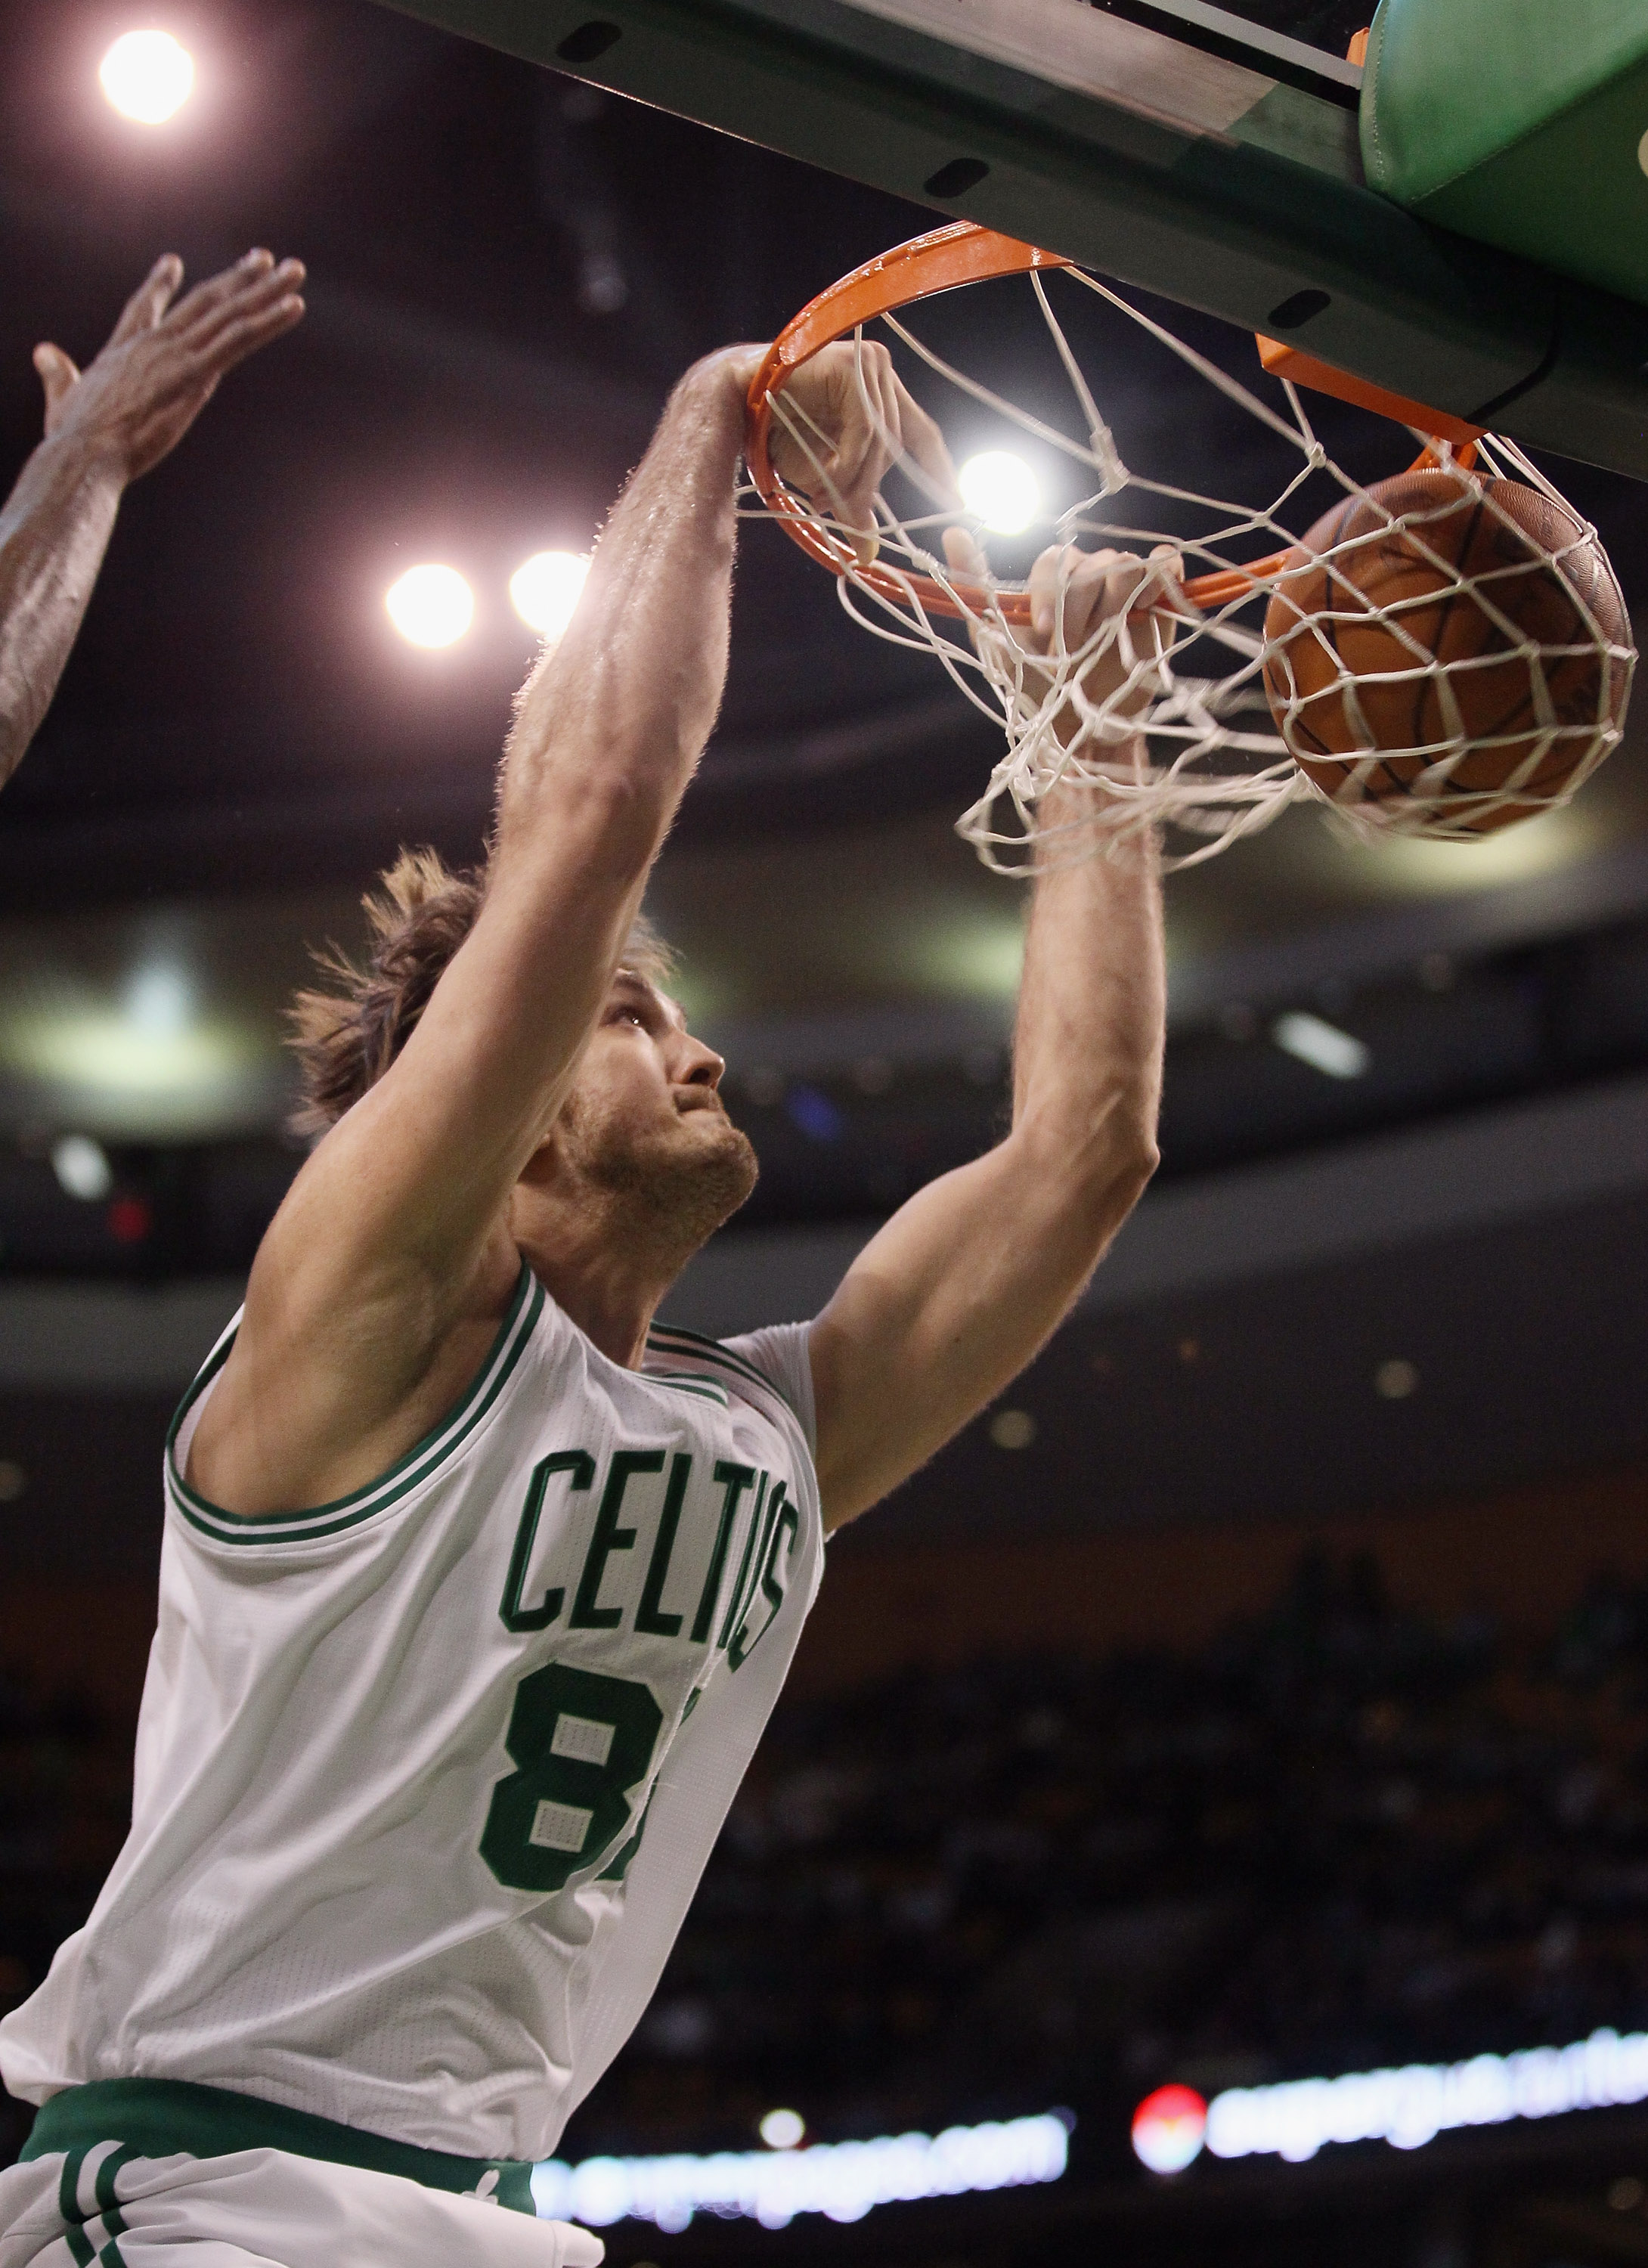 BOSTON, MA - JANUARY 21:  Semih Erden #86 of the Boston Celtics dunks the ball in the fourth quarter against the Utah Jazz on January 21, 2011 at the TD Garden in Boston, Massachusetts.  The Celtics defeated the Jazz 110-86. NOTE TO USER: User expressly a